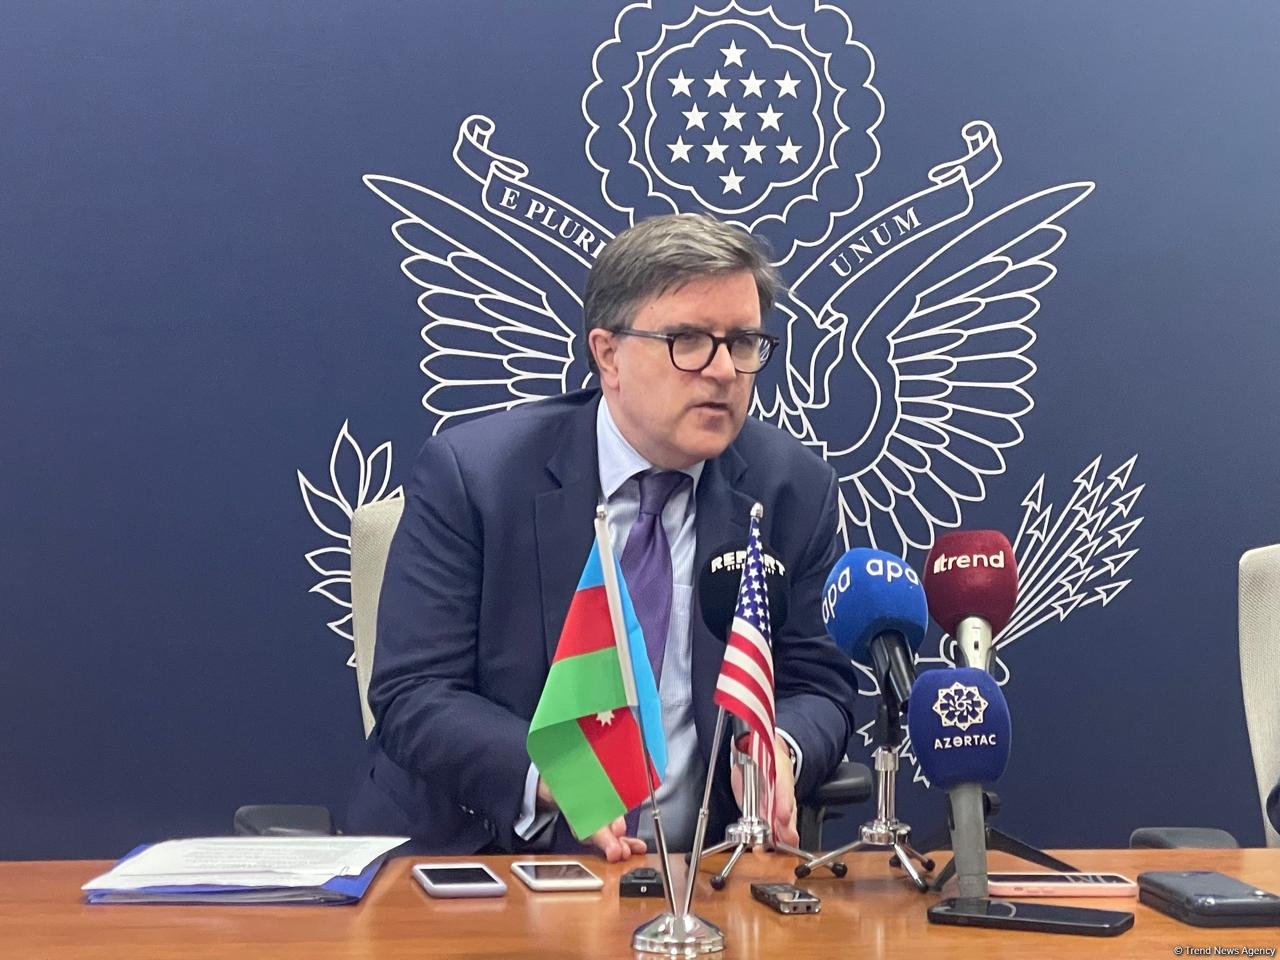 US sees great potential for supply of Central Asian goods through Azerbaijan - Assistant Secretary of State